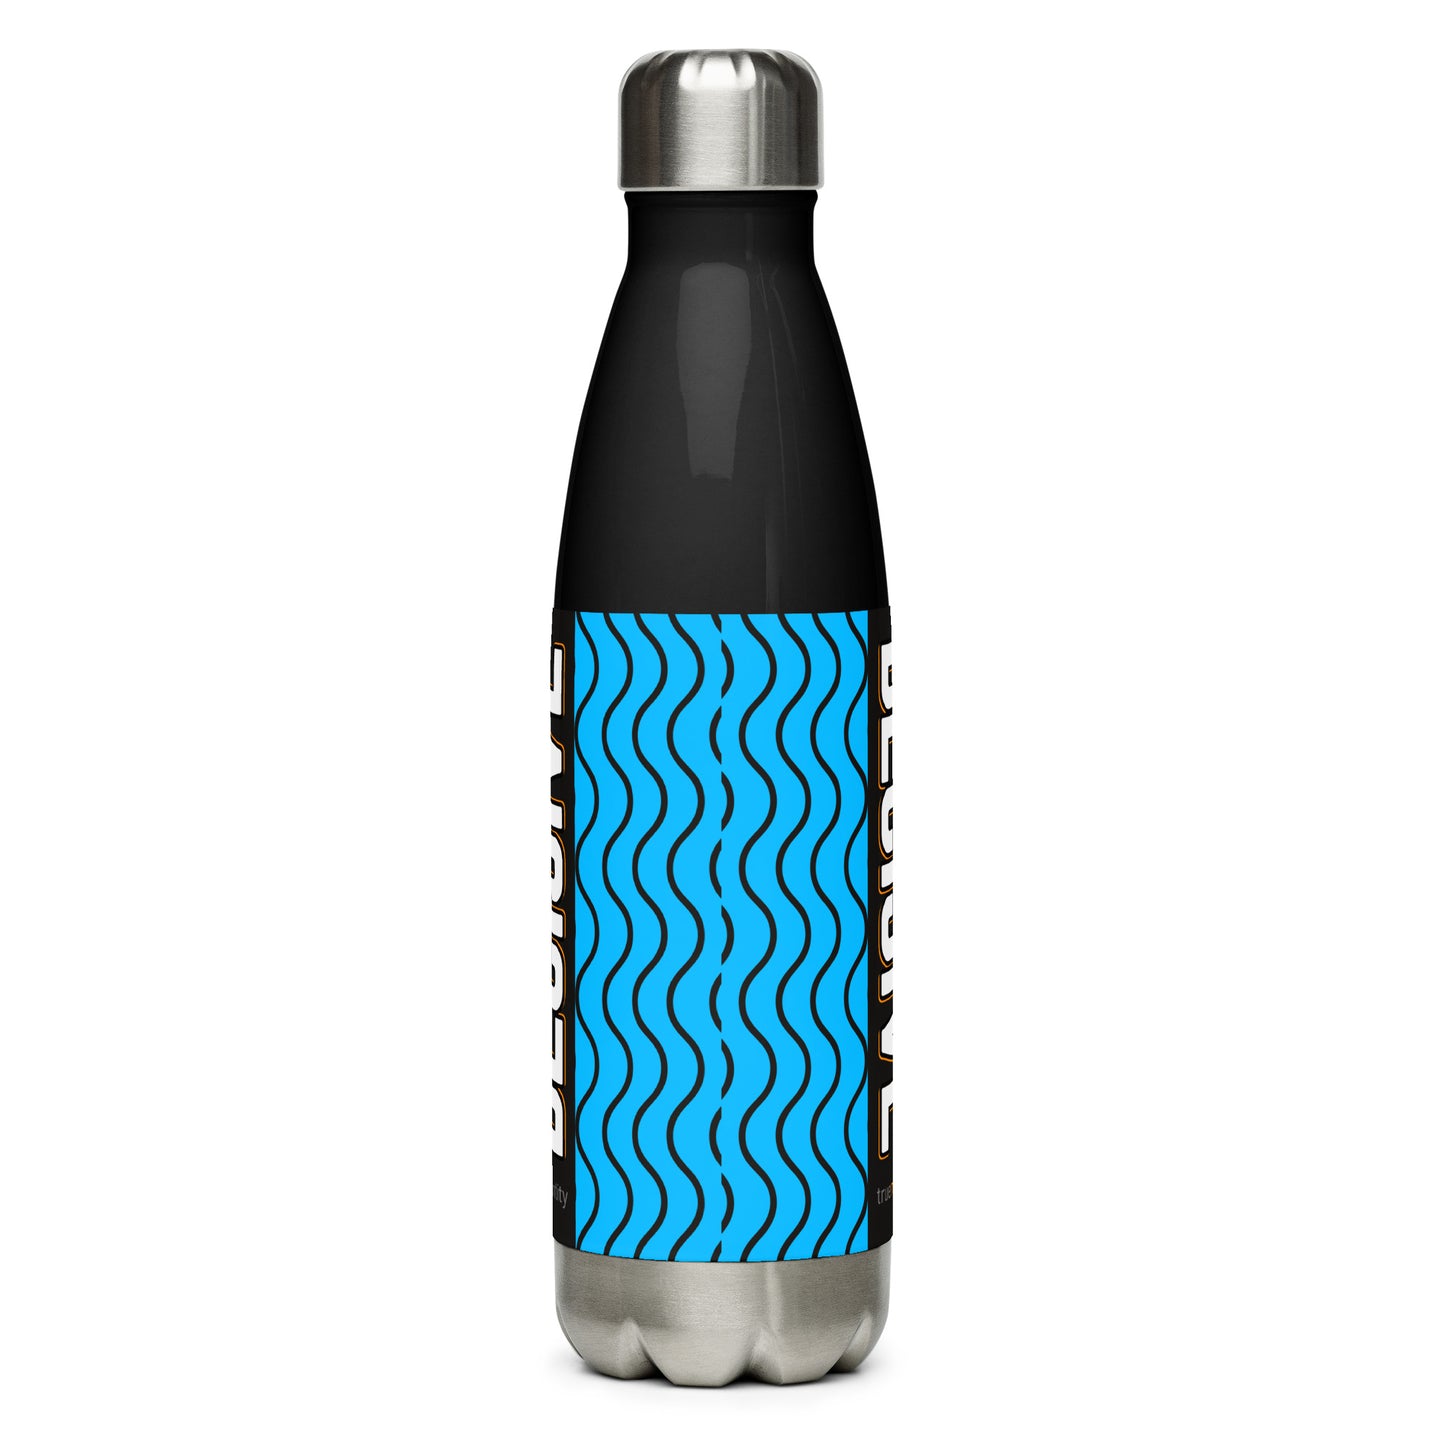 DECISIVE Stainless Steel Water Bottle Blue Wave Design, 17 oz, in Black or White